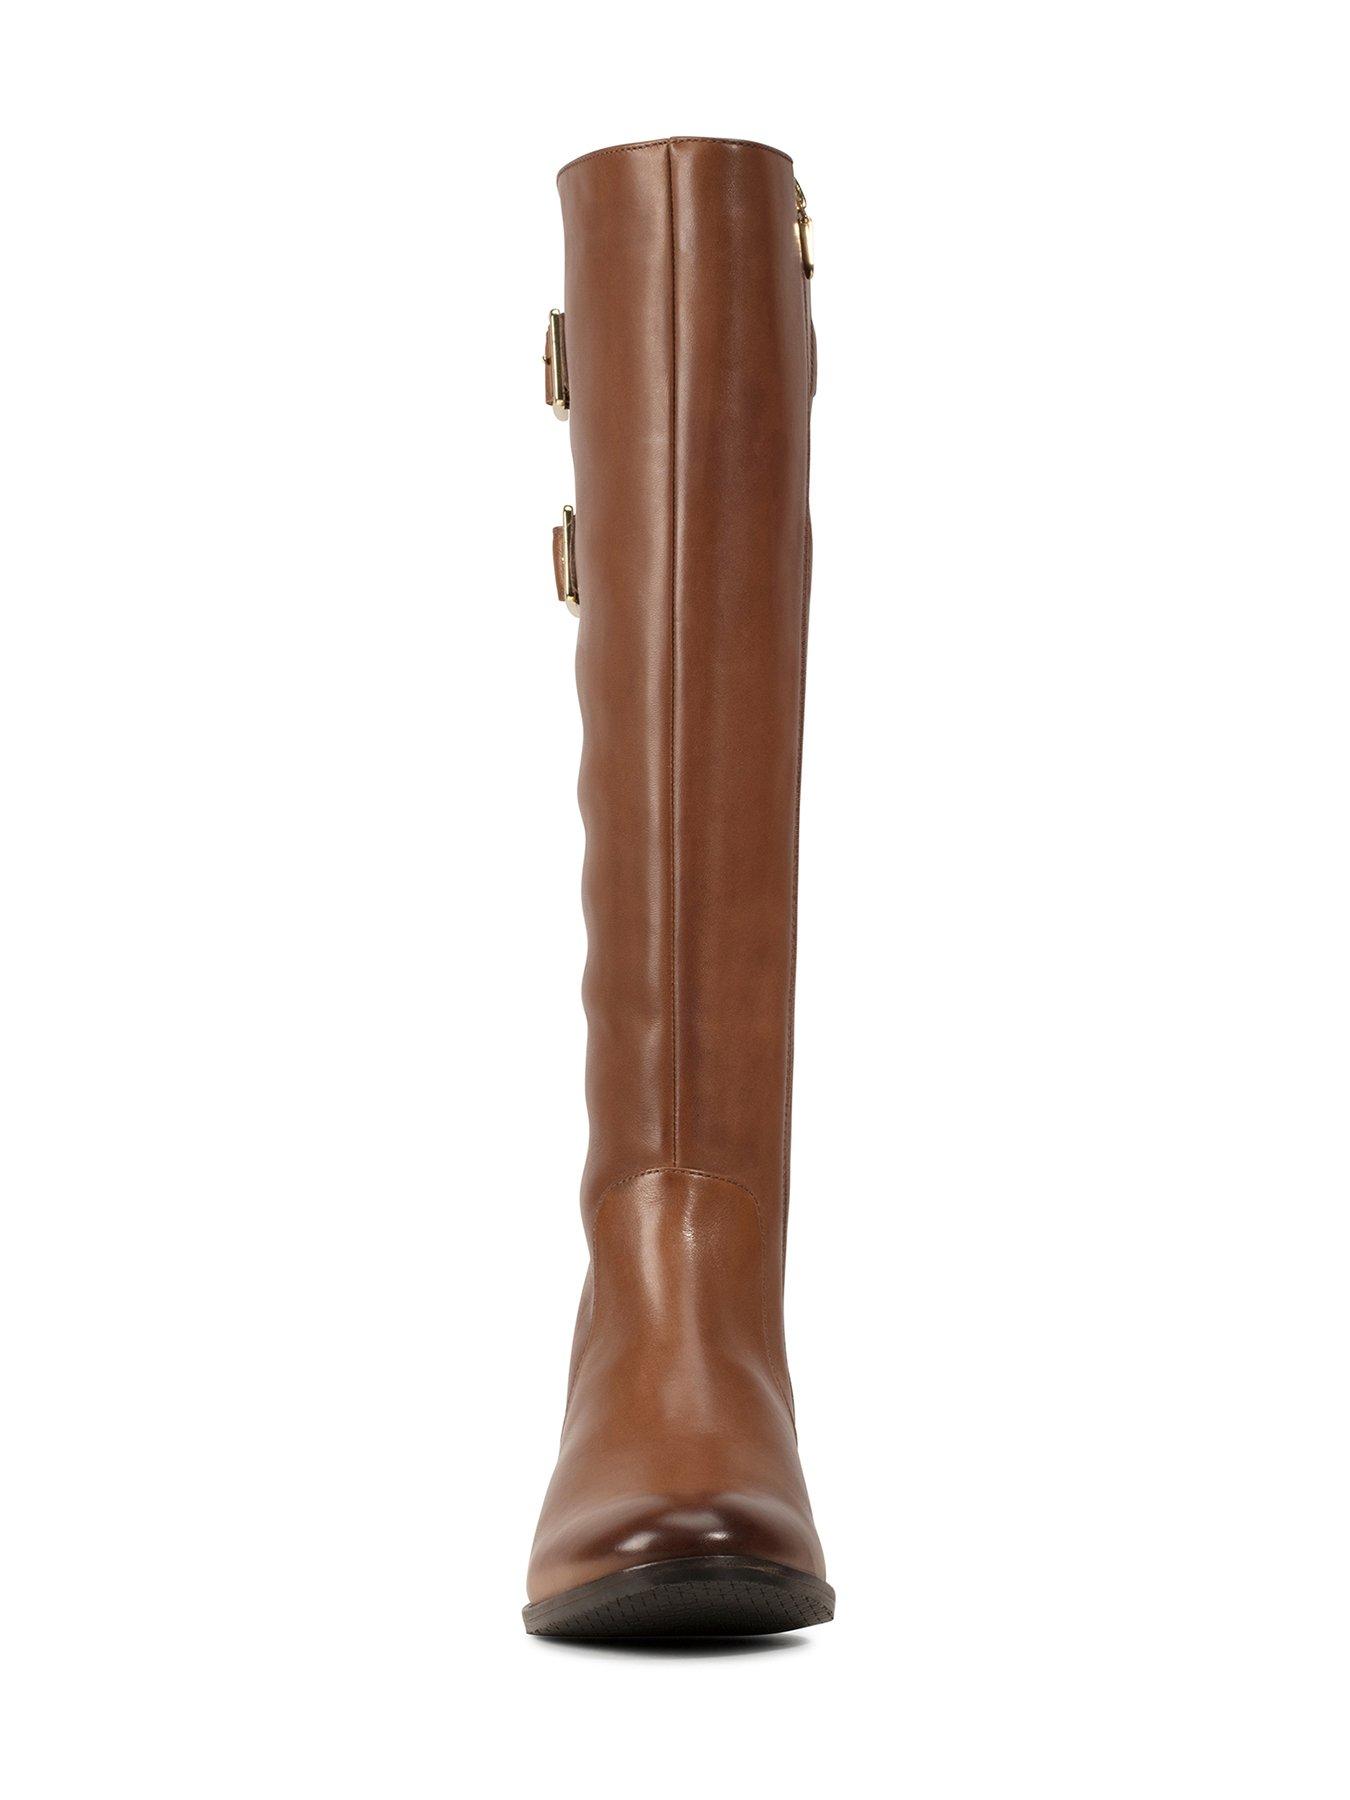 tan leather knee boots uk